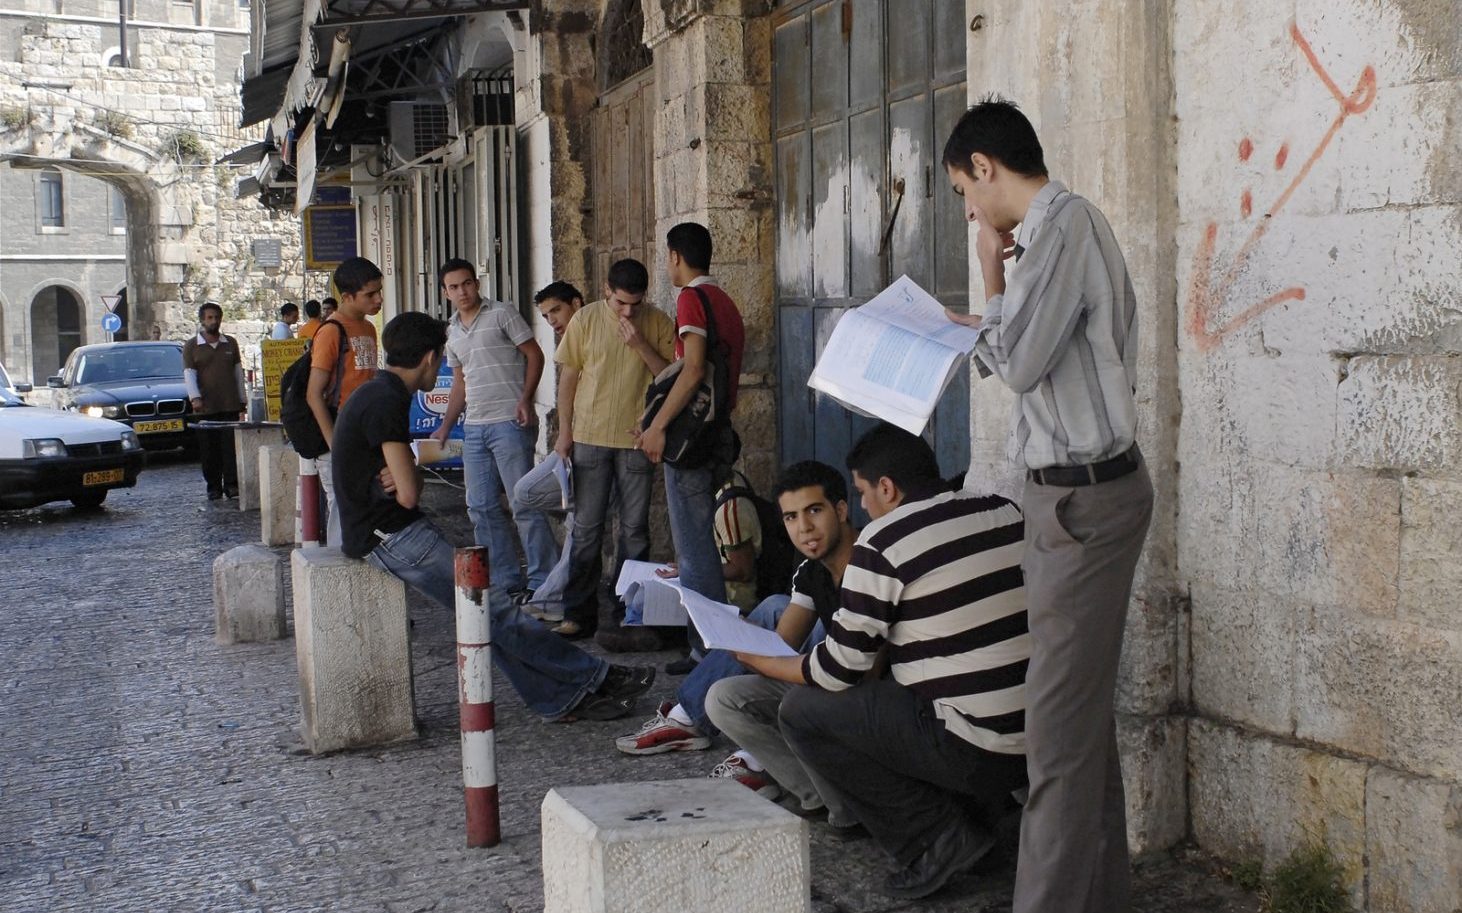 JERUSALEM JUNE 12: Group of young, male, Arab students stand inside the New Gate on Bab El-Jadid Street in Old City, Jerusalem, Israel, studying for their final graduation exams on June 12, 2007.